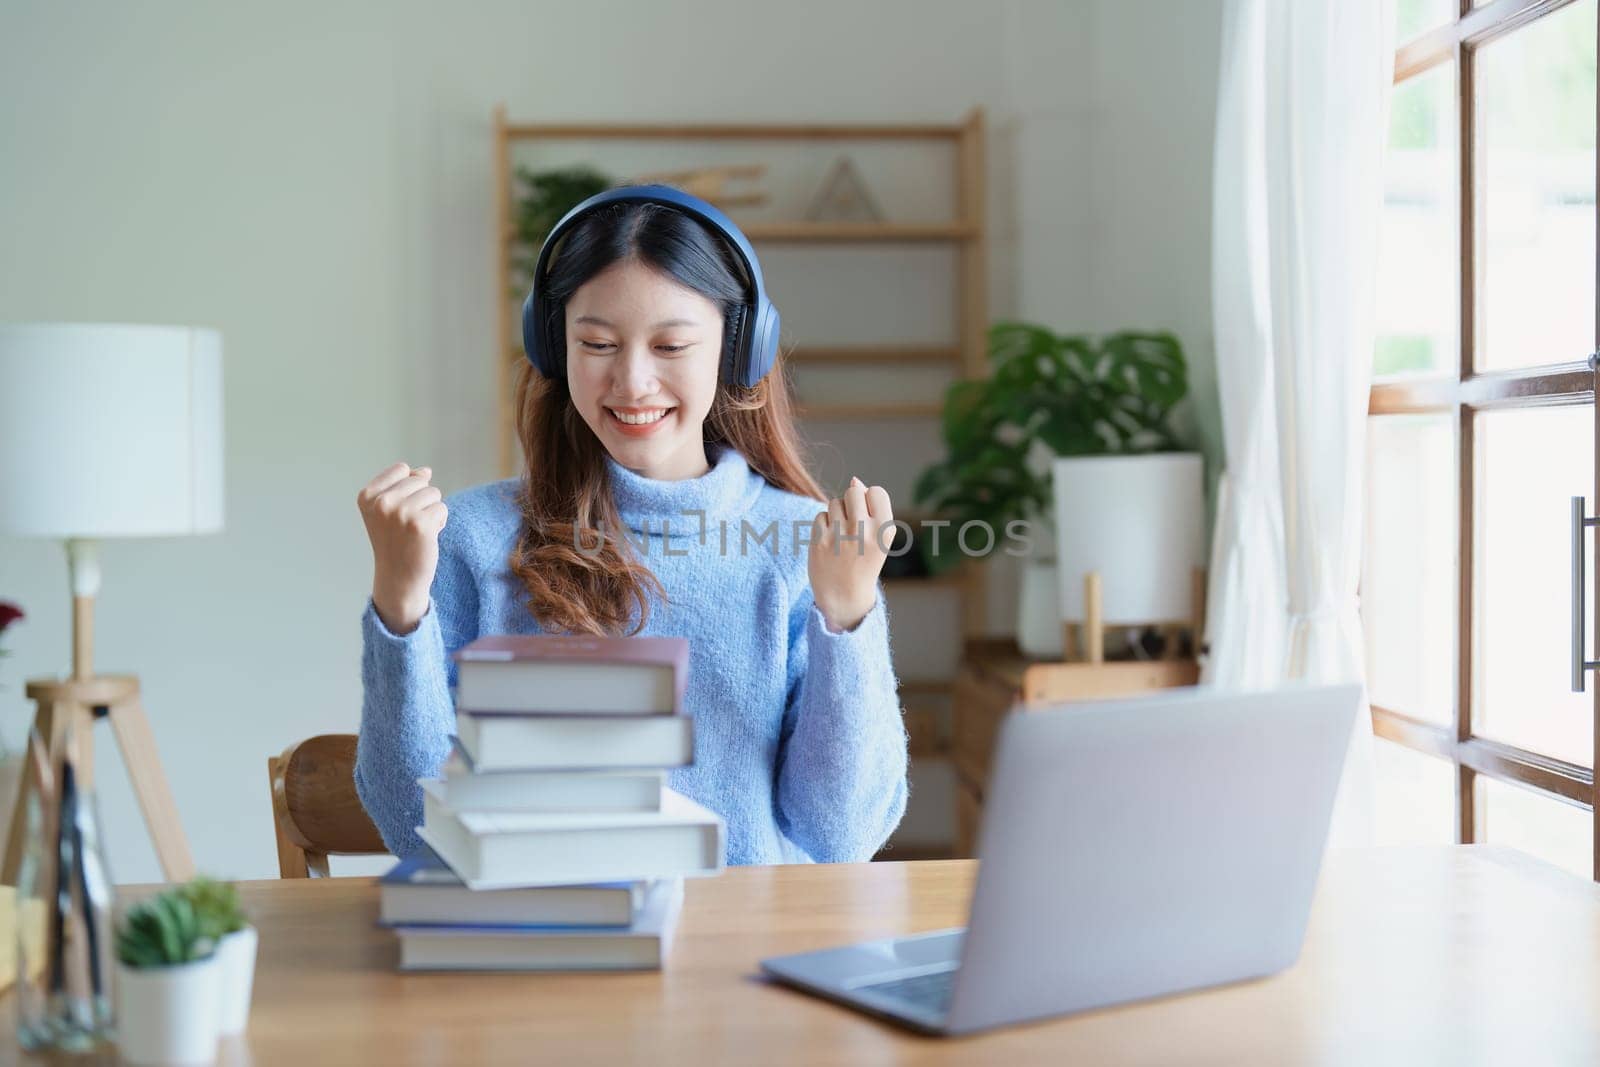 Portrait of young beautiful Asian woman showing smiling face during early morning online class with books, headphones and computer as study materials at home by Manastrong